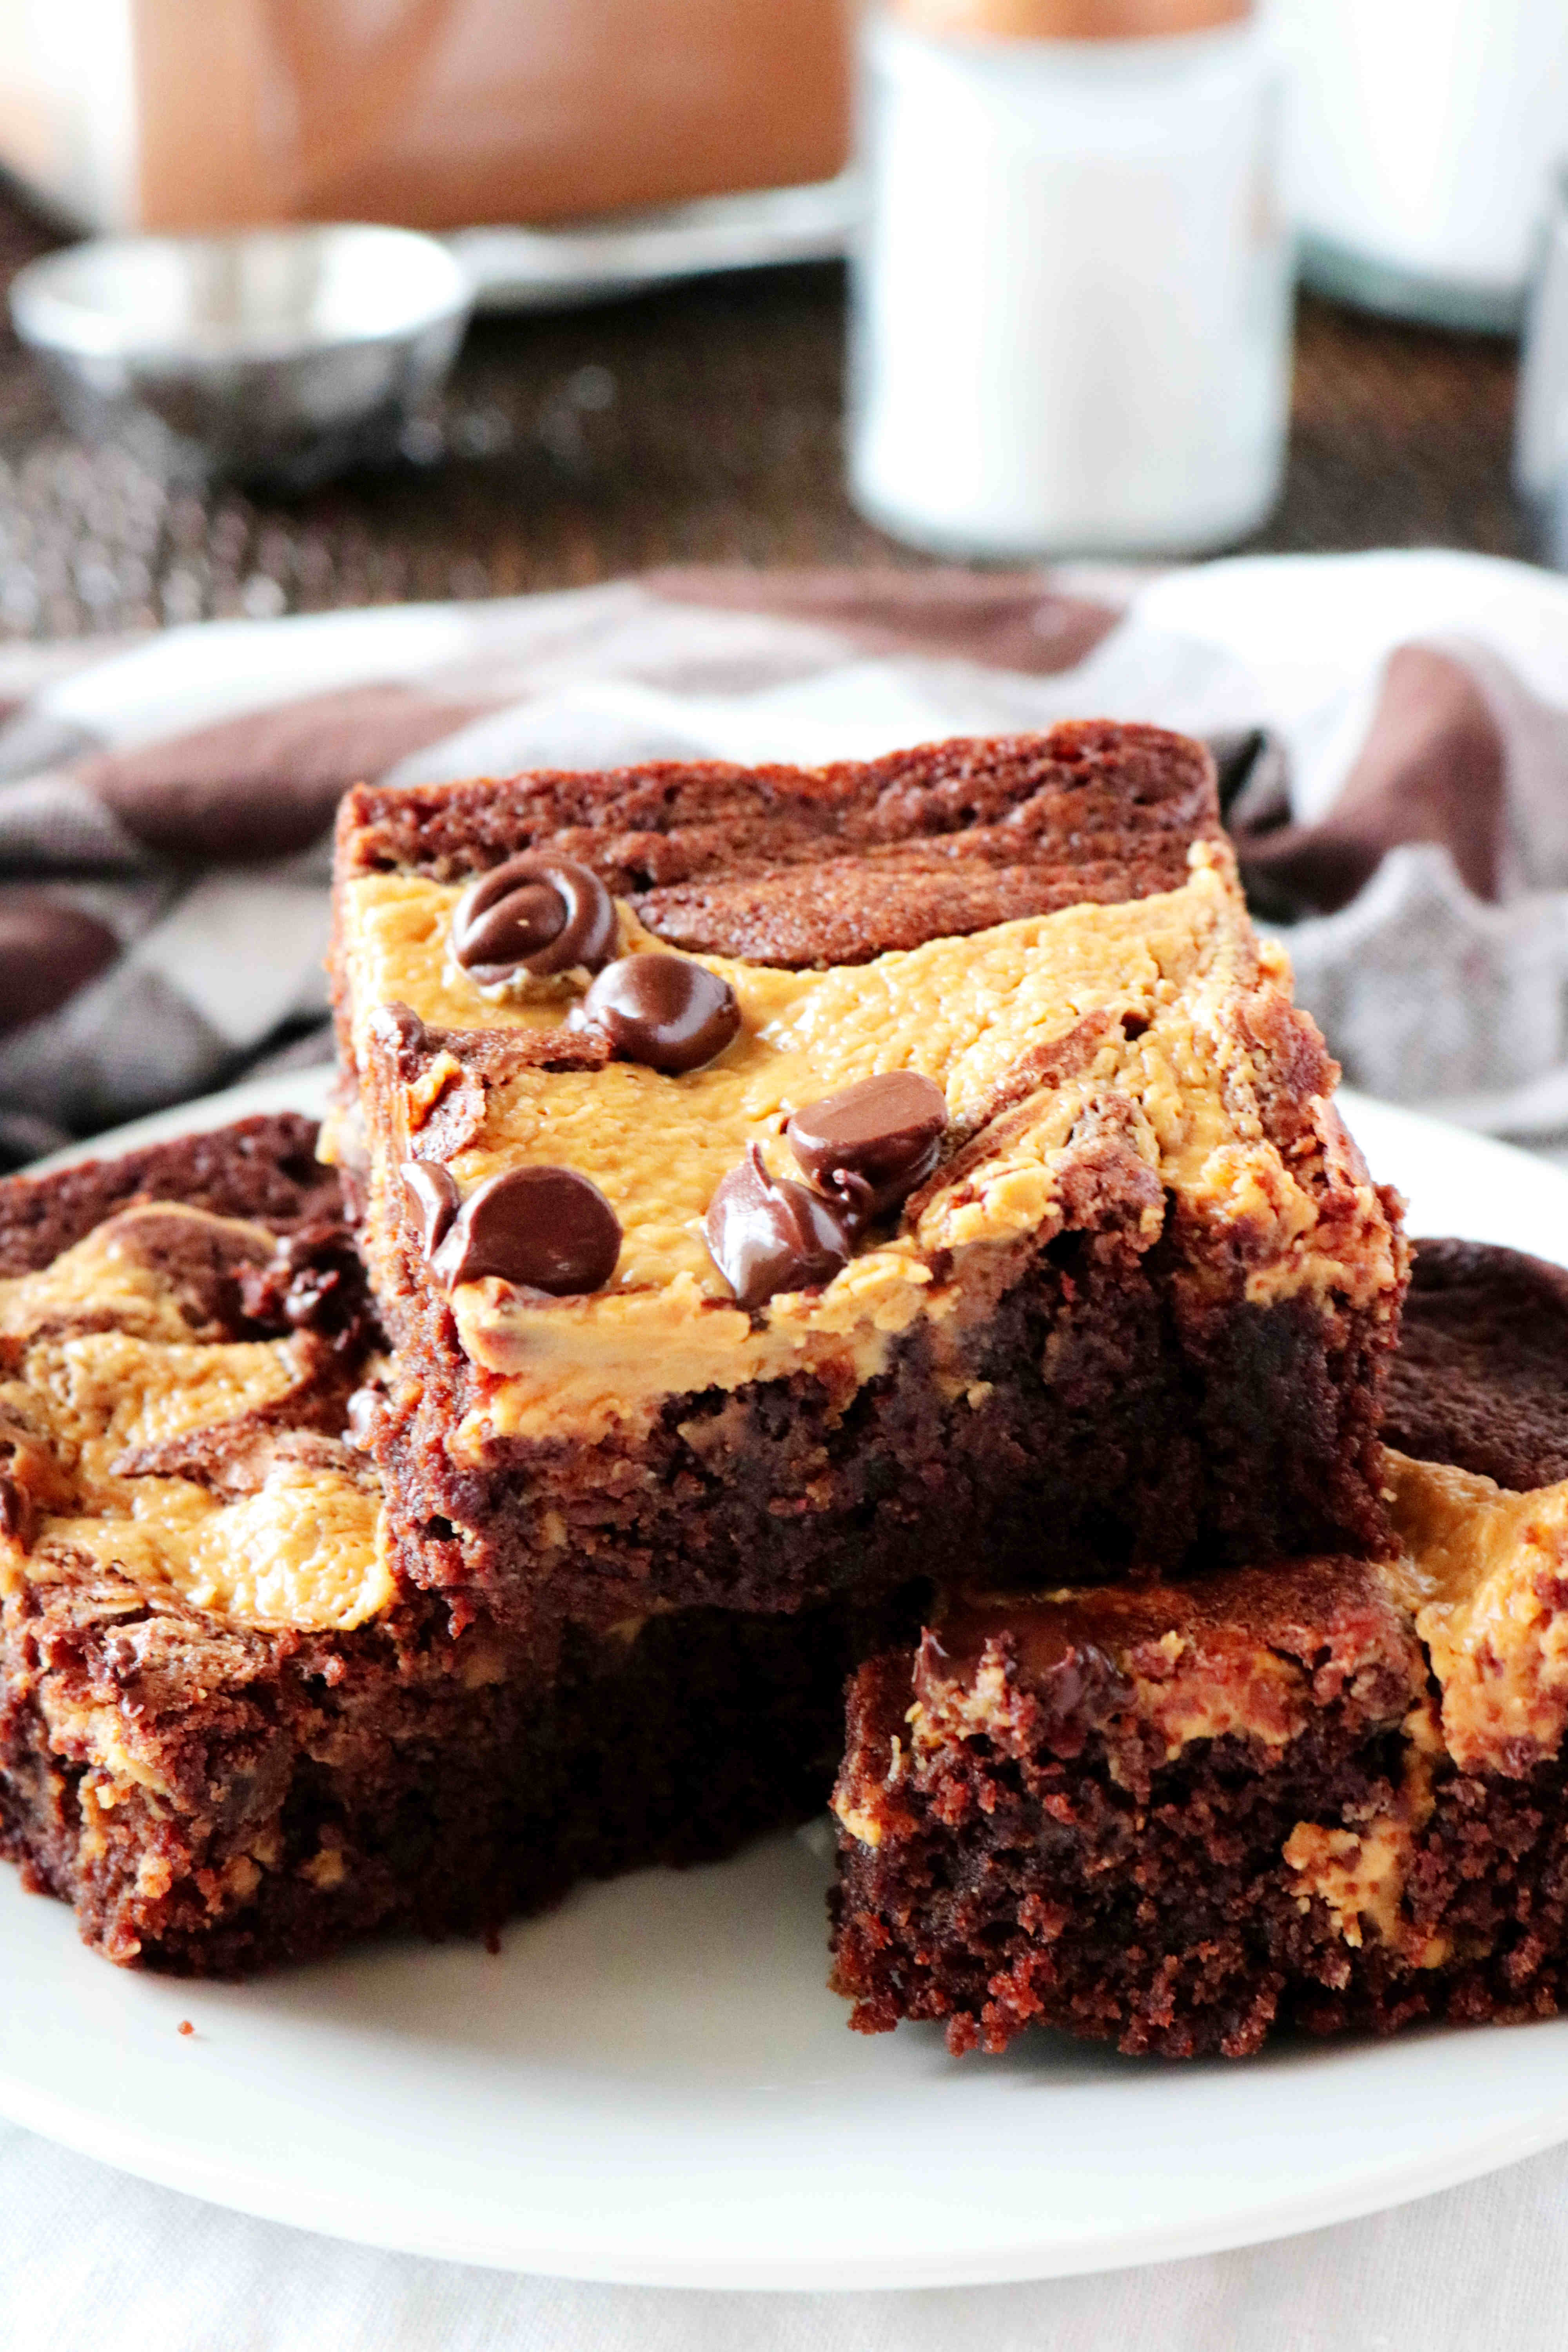 Chocolate Peanut Butter Brownies Recipe - The Anthony Kitchen